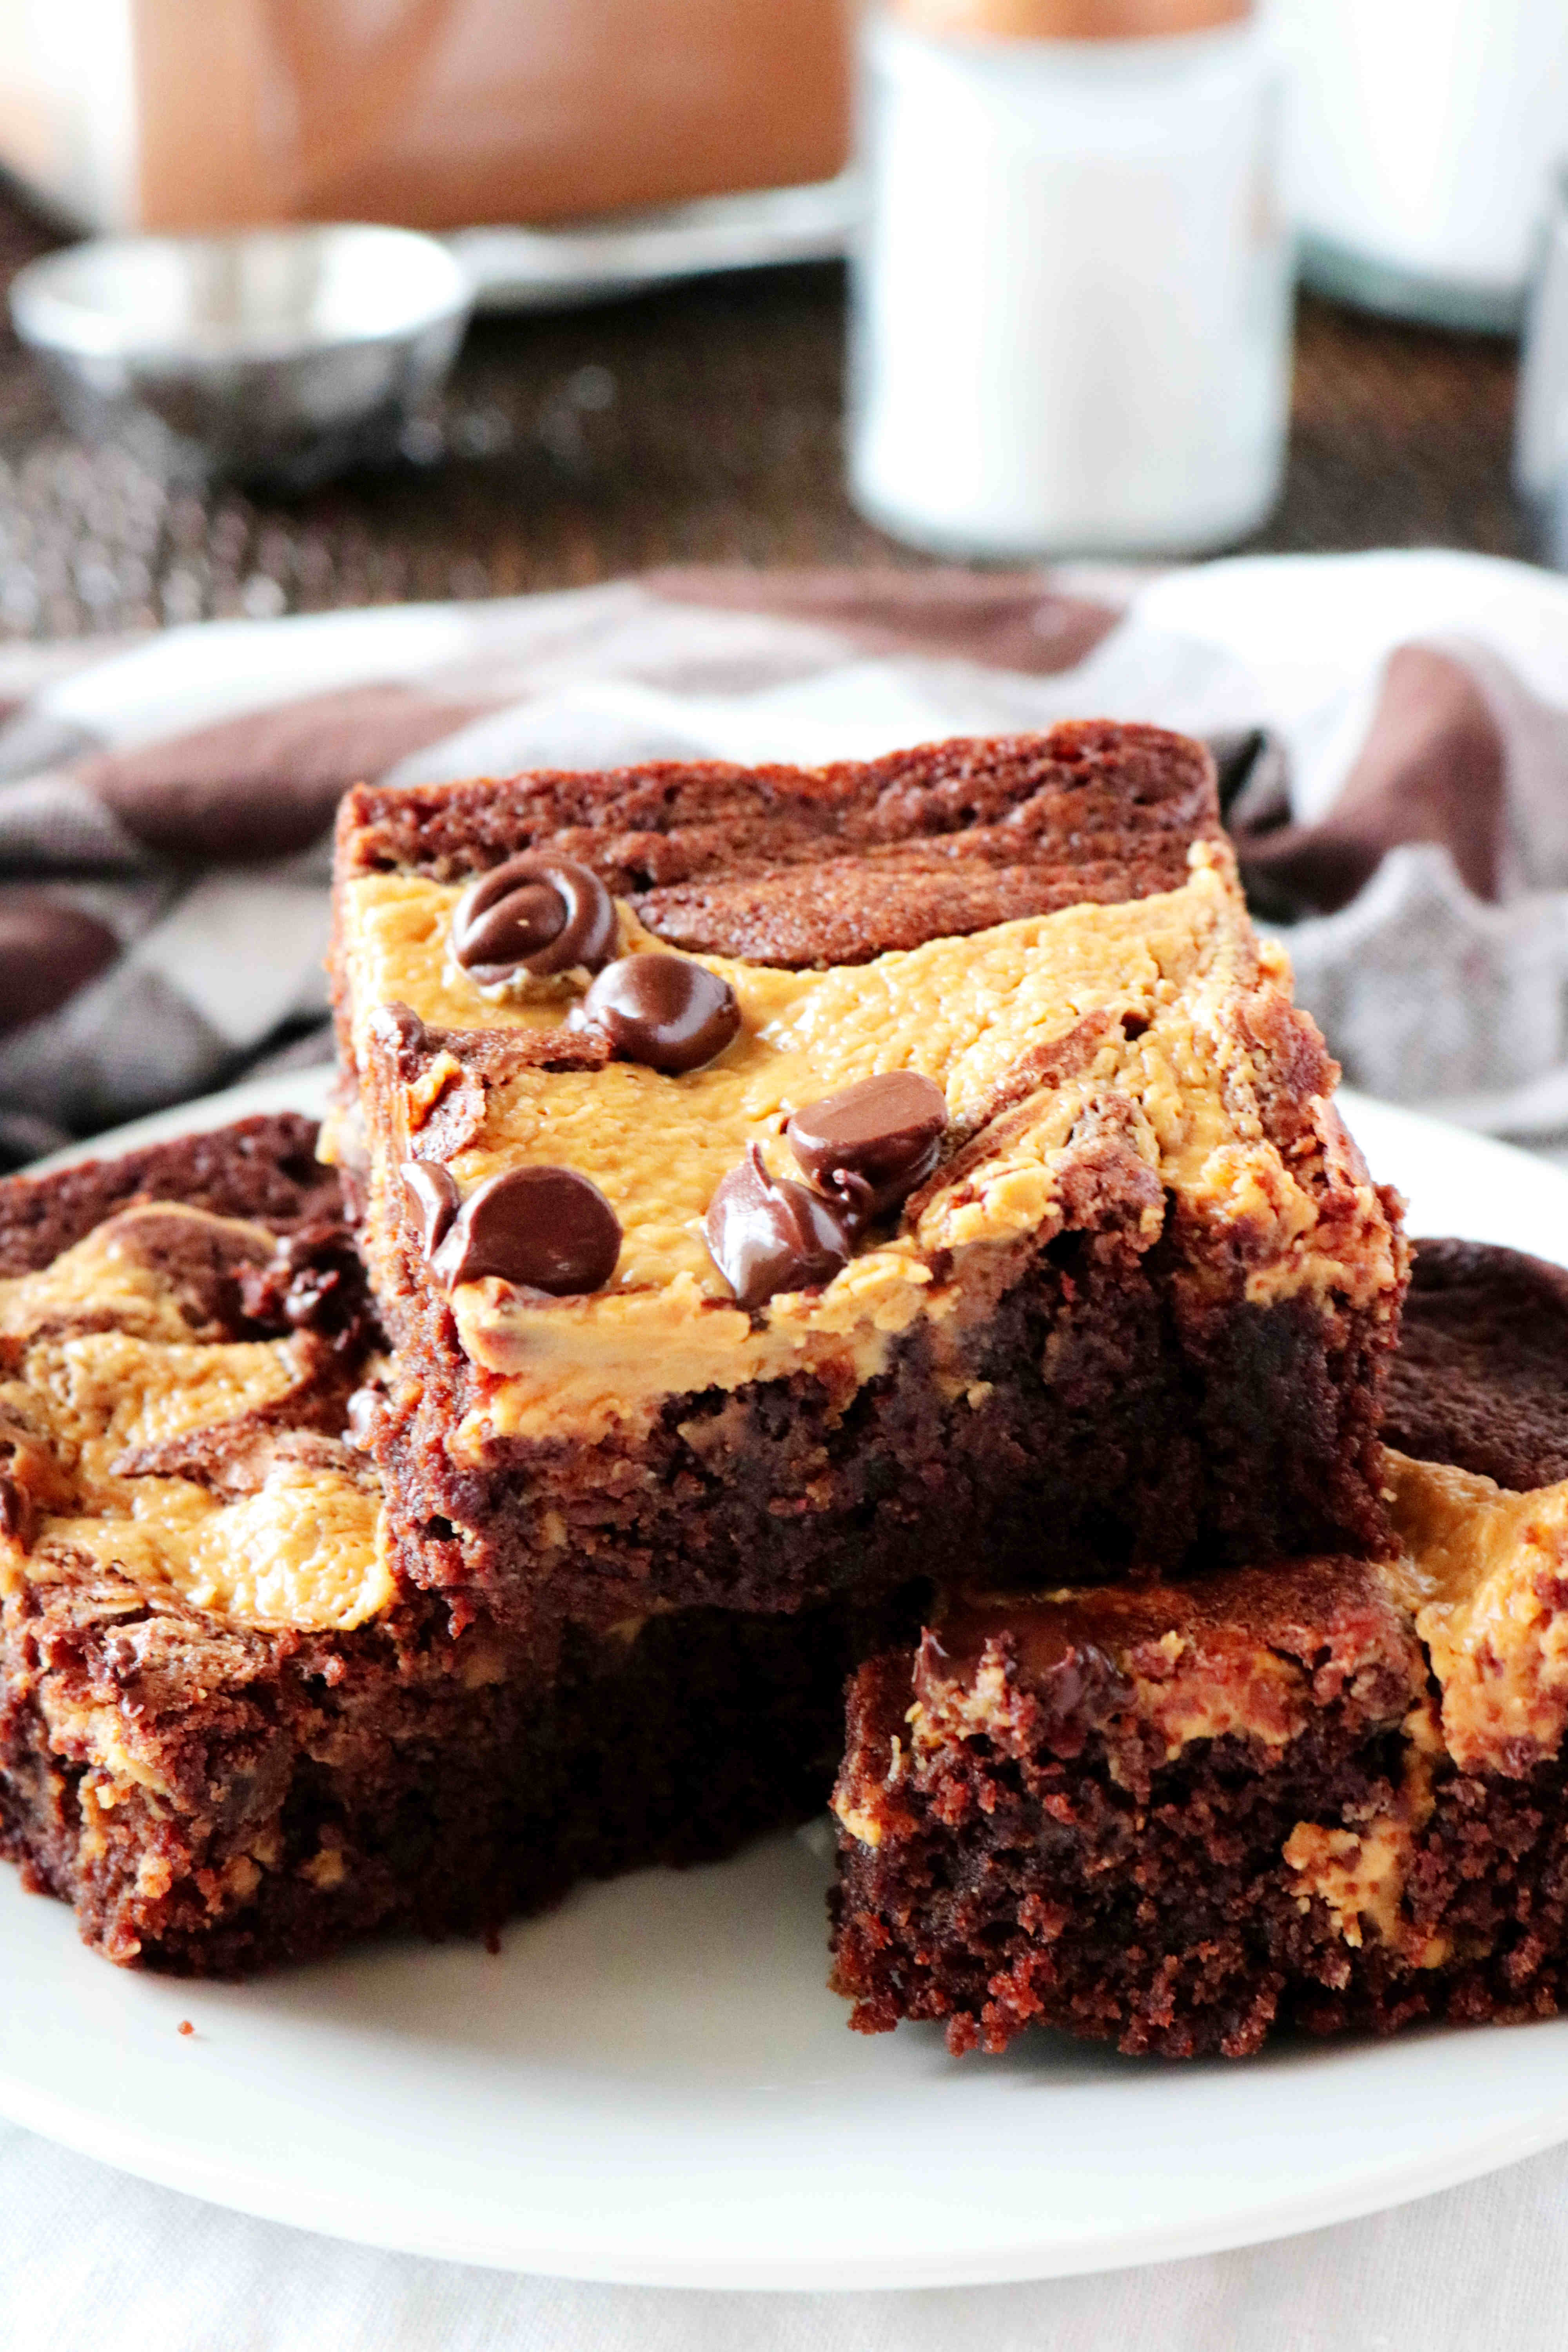 Chocolate Peanut Butter Brownies Recipe - The Anthony Kitchen